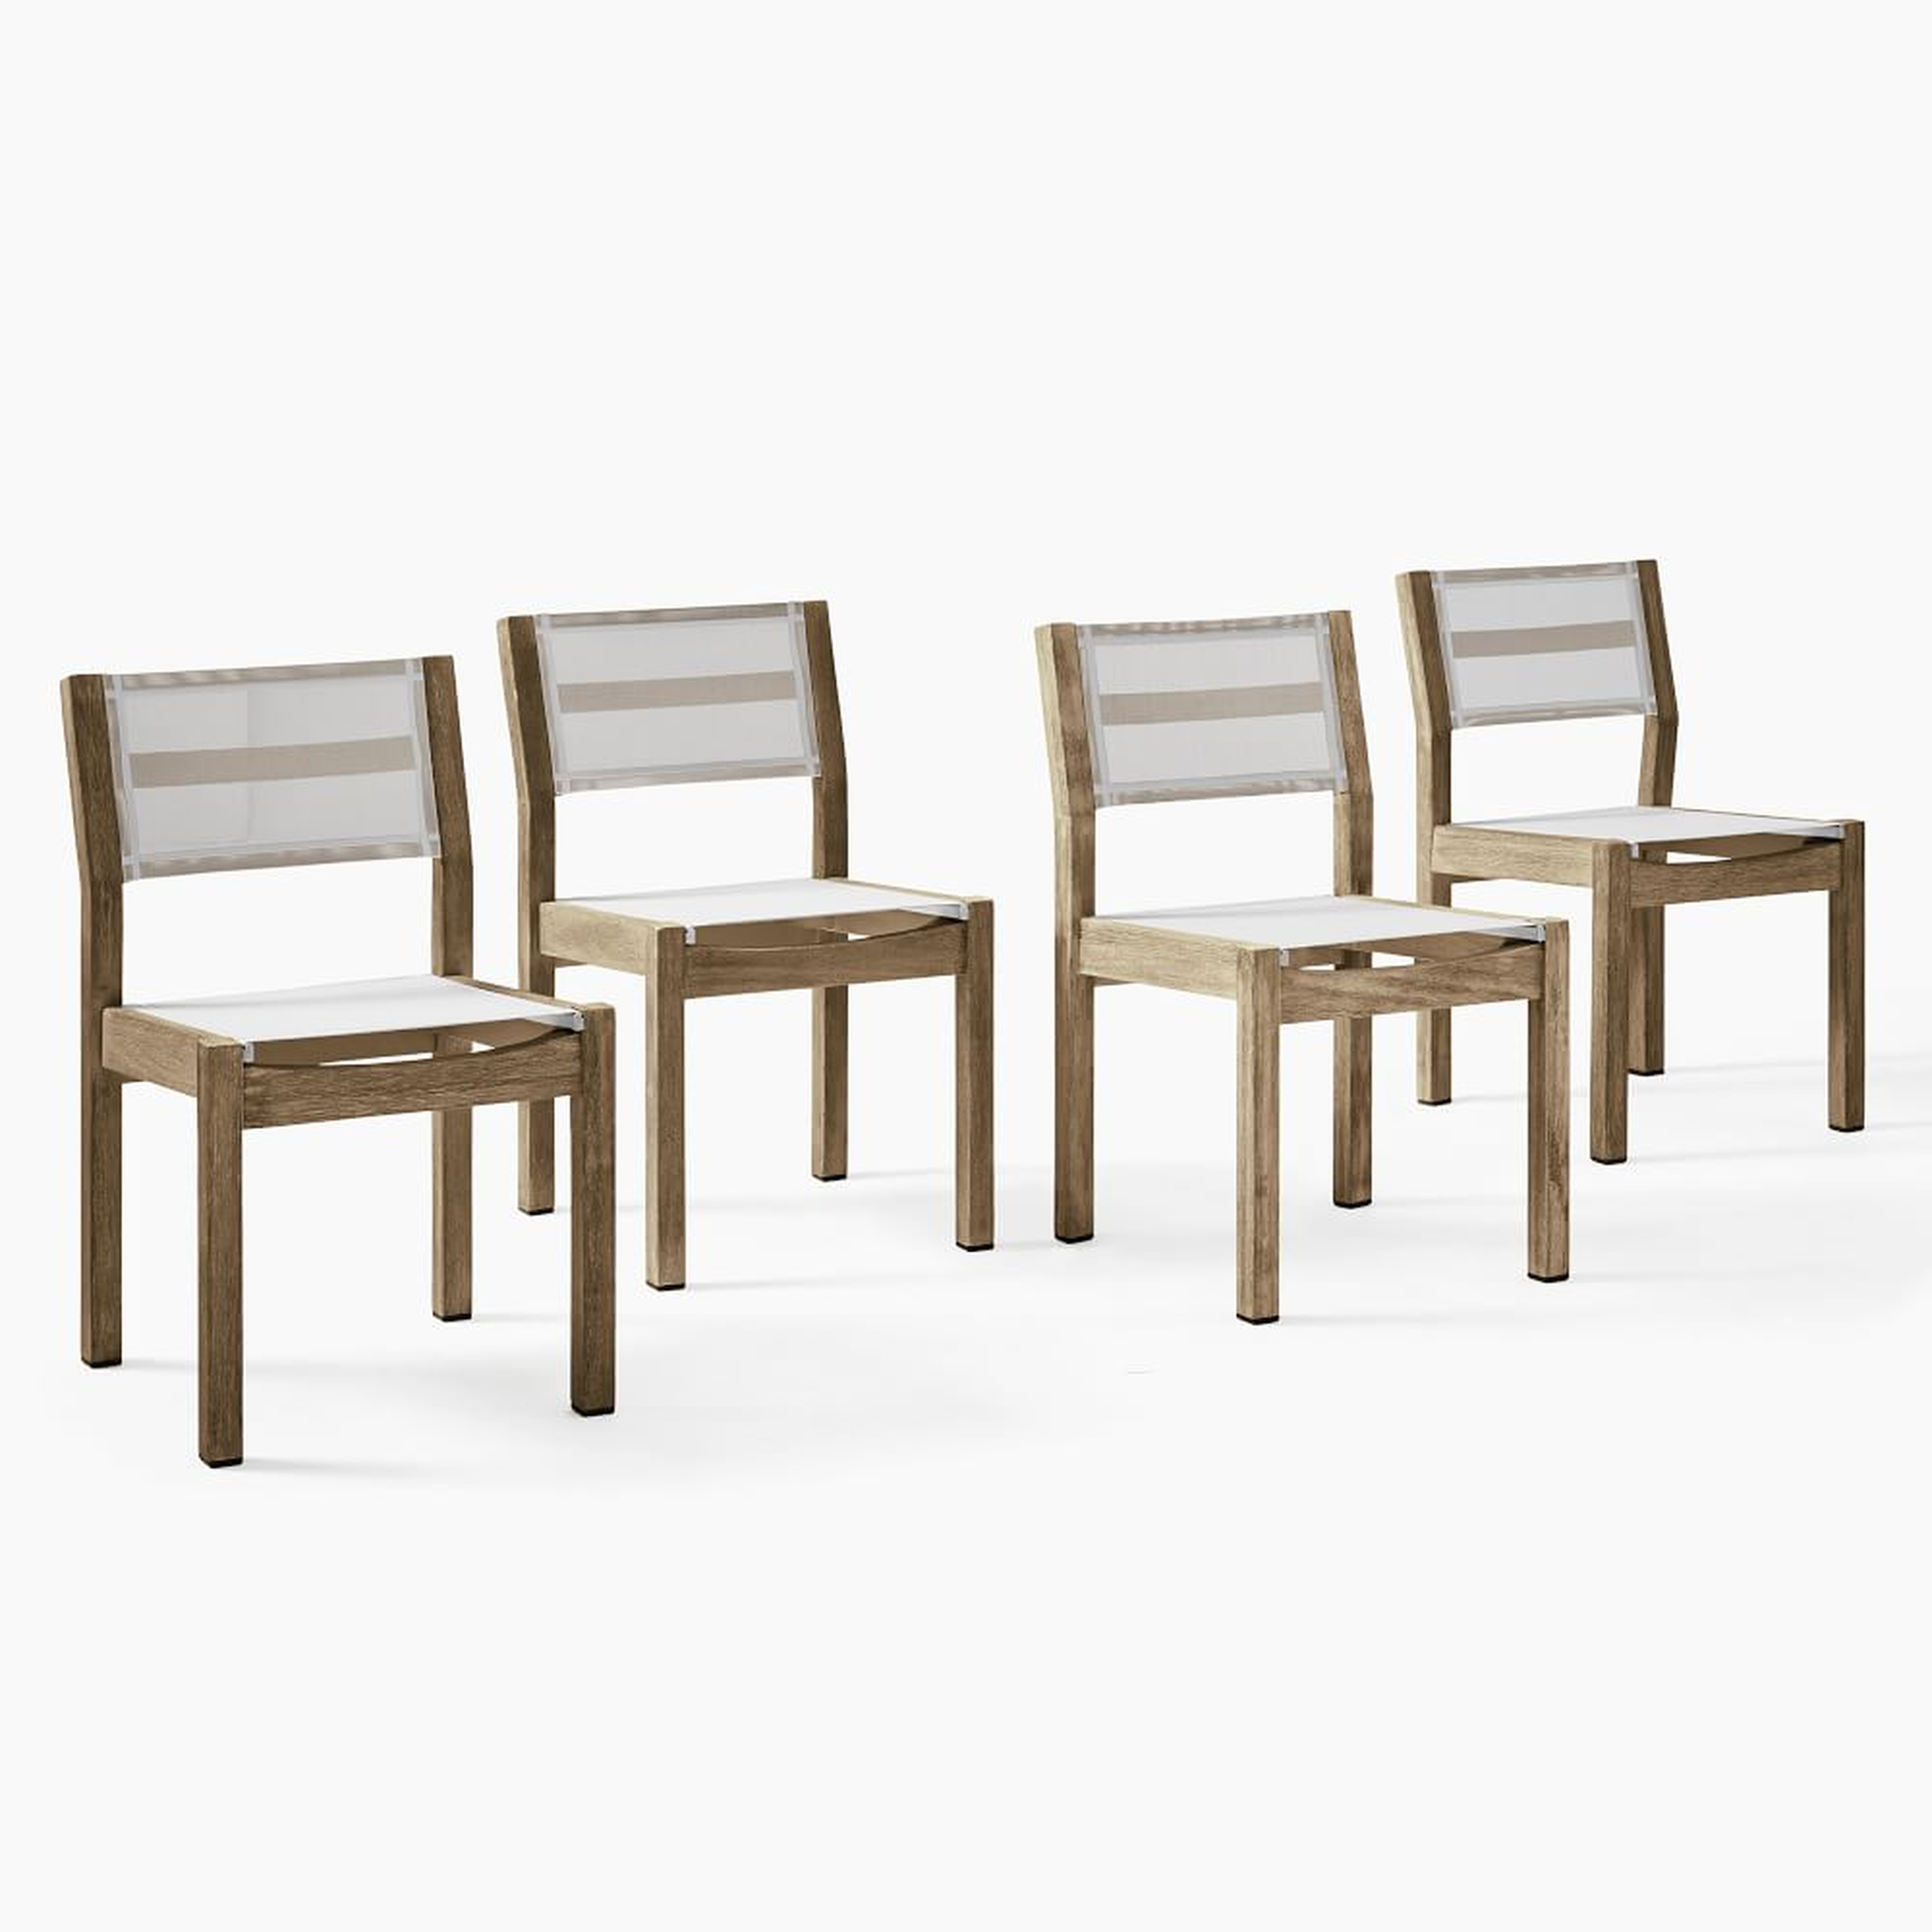 Portside Outdoor Textaline Dining Chairs, Driftwood, Set of 4 - West Elm